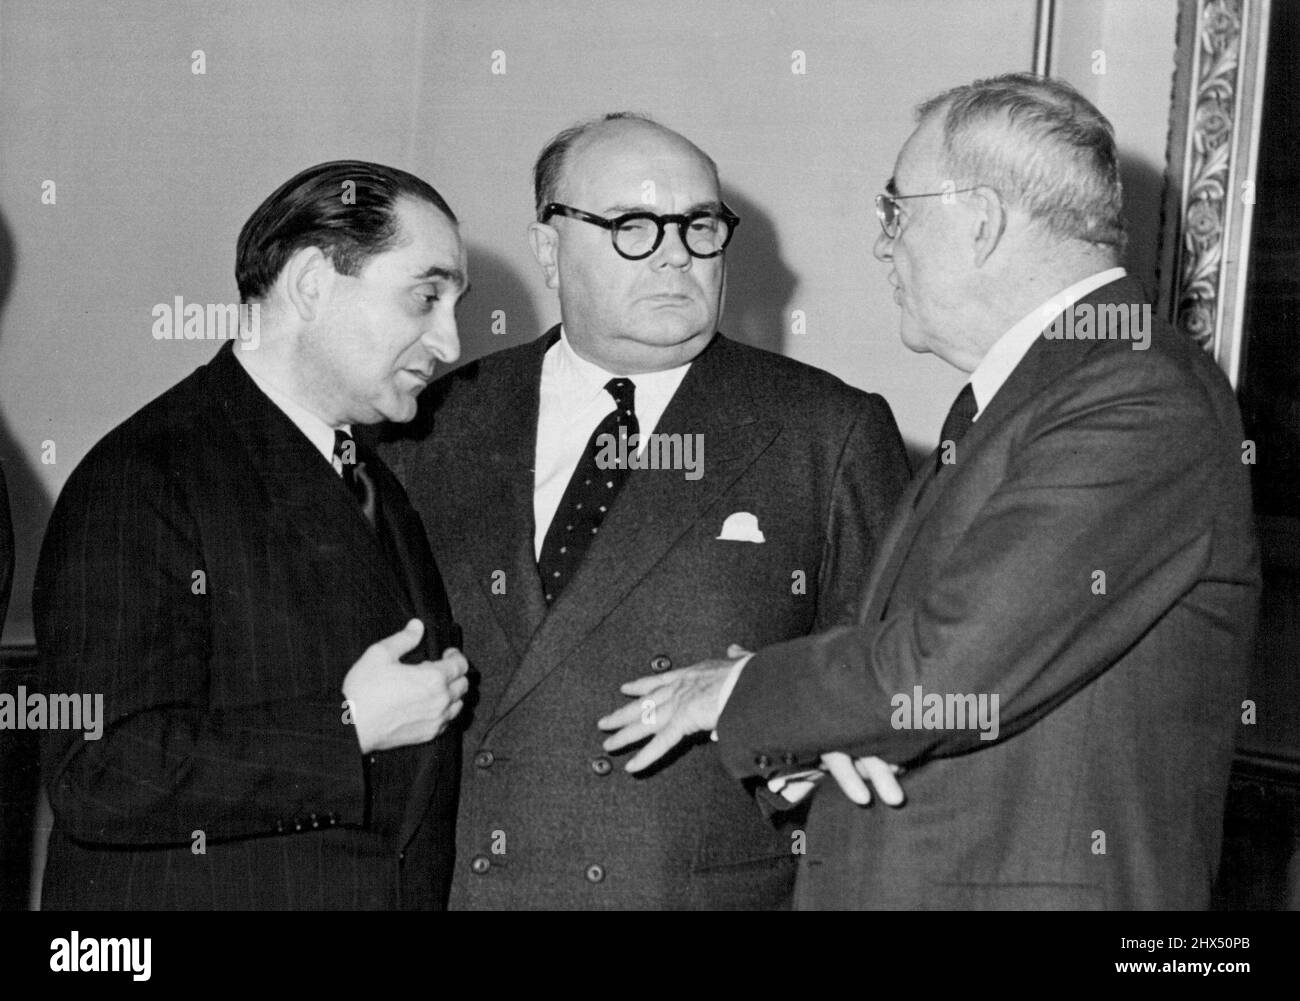 The historic pact making Germany an equal partner in Western defence has been signed, but France's M. Mendes-France (left), Belgium's M. Spaak (center) and America's Mr. Dulles still debate a point. Perhaps it is a last-minute doubt that solemn-looking M. Mendes-France has. But Mr. Dulles seems to be making his point M. Spaak has that Yes-you-have-something-there' look. October 4, 1954. (Photo by Daily Mirror) Stock Photo